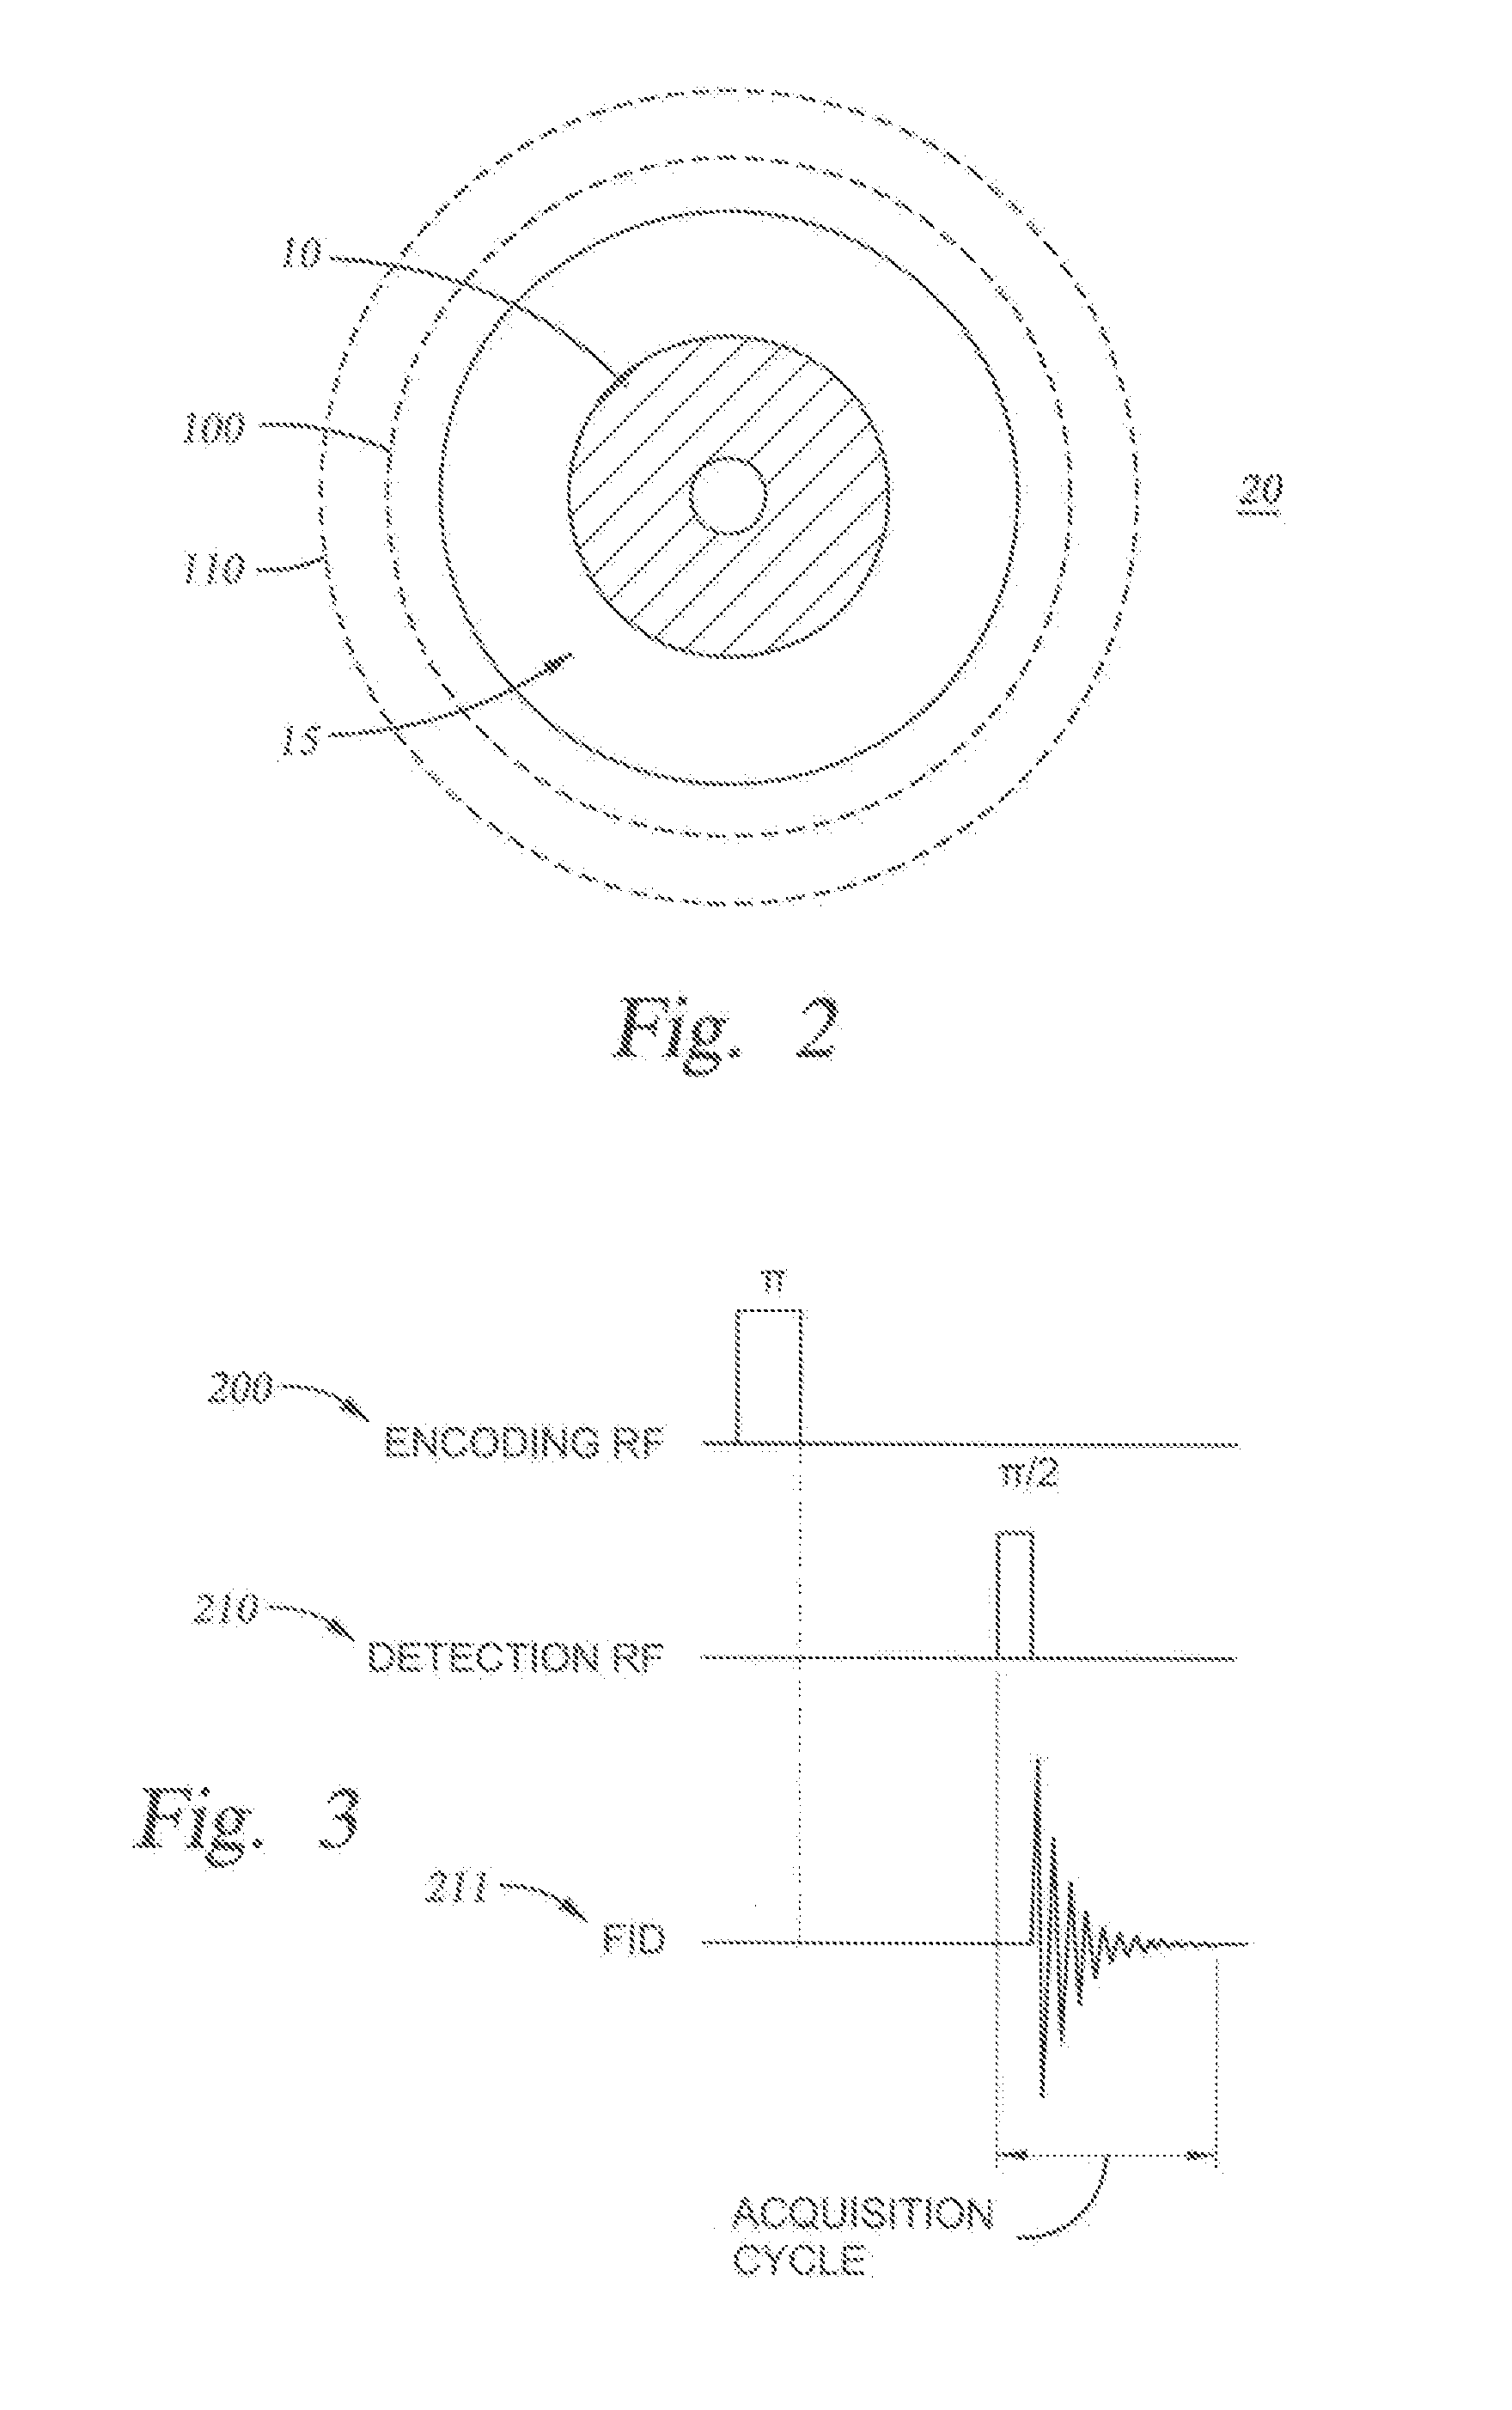 System and Method for Downhole Time-of-Flight Sensing, Remote NMR Detection of Fluid Flow in Rock Formations